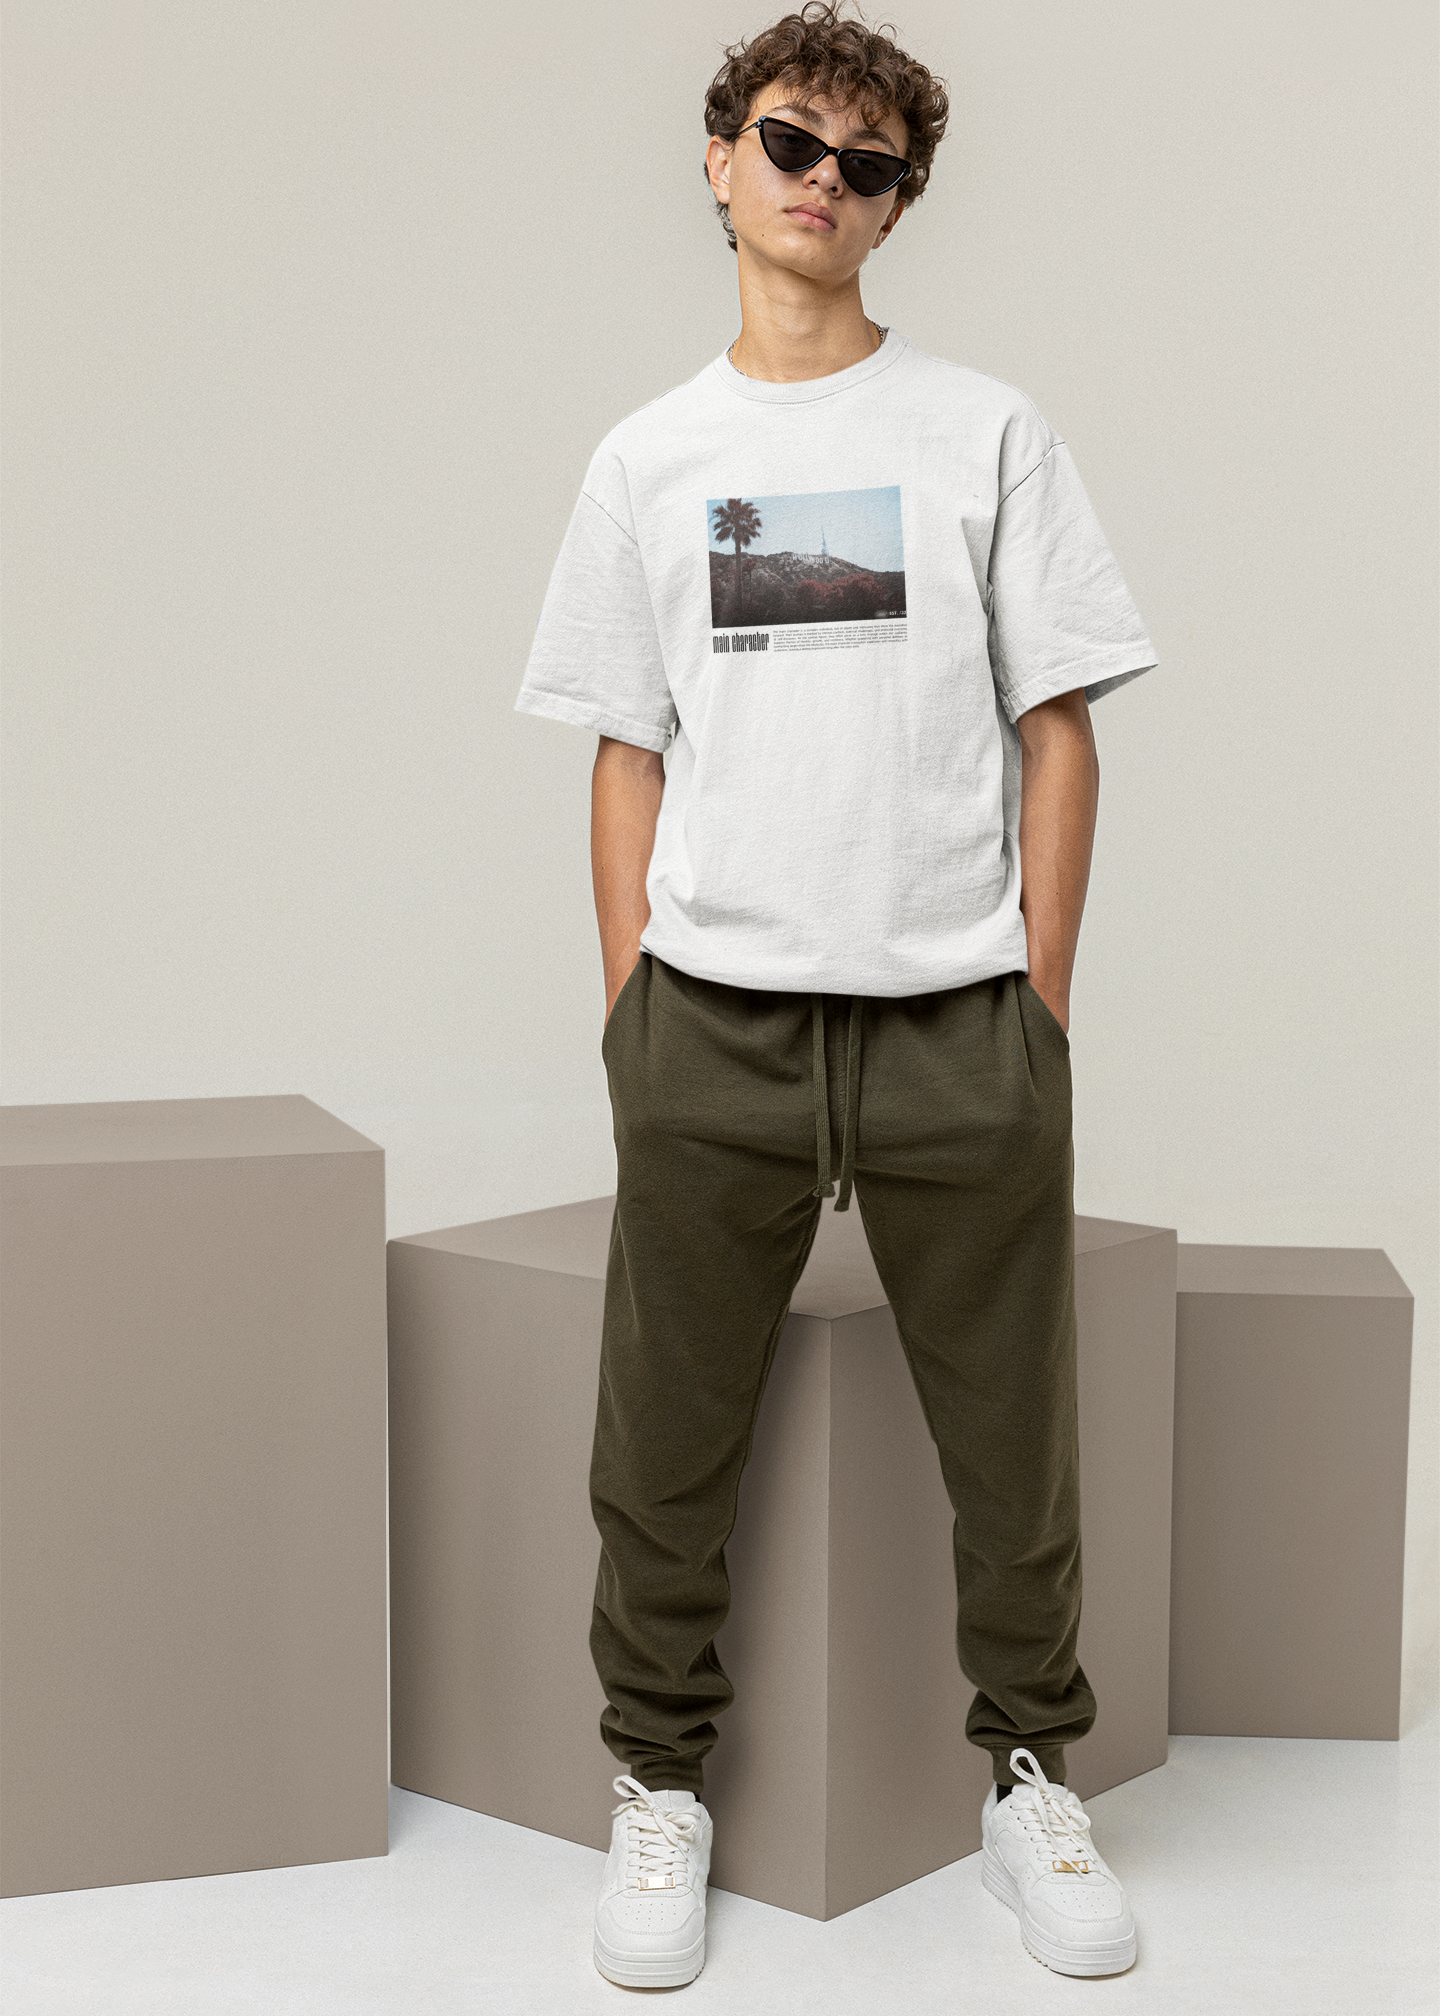 mockup-of-a-man-wearing-a-cool-oversized-t-shirt-m26207_1.png